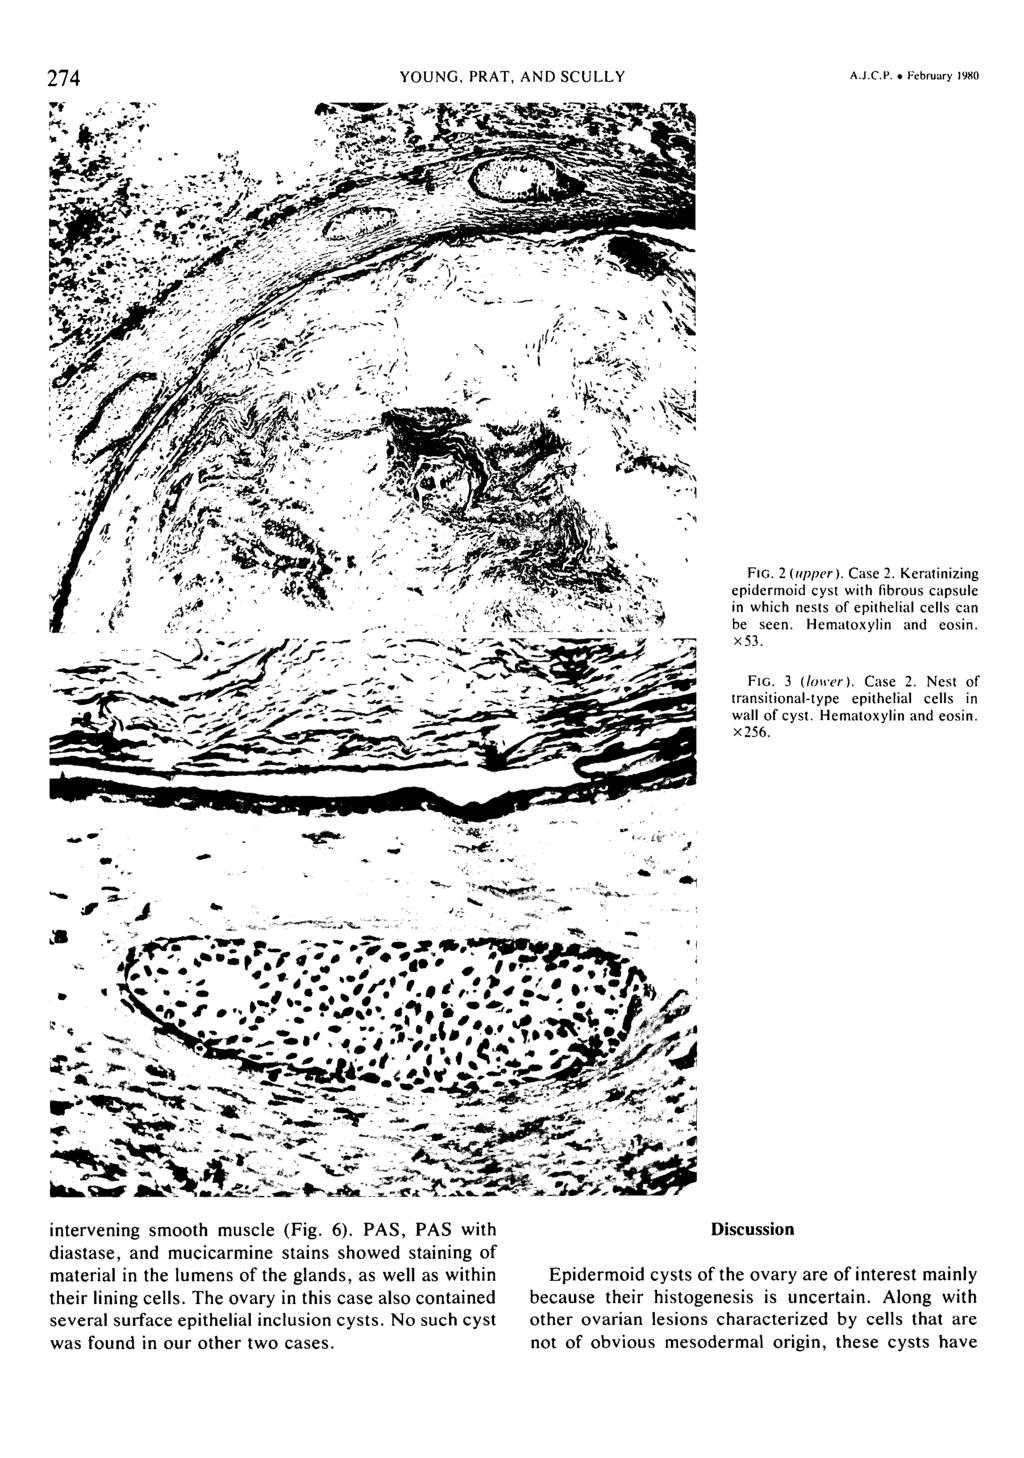 74 YOUNG. PAT, AND SCUY A.J.C.I'. February 1980 FIG. {upper).. Keratinizing epidermoid cyst with fibrous capsule in which nests of epithelial cells can be seen. Hematoxylin and eosin. X5. FIG. {lower).